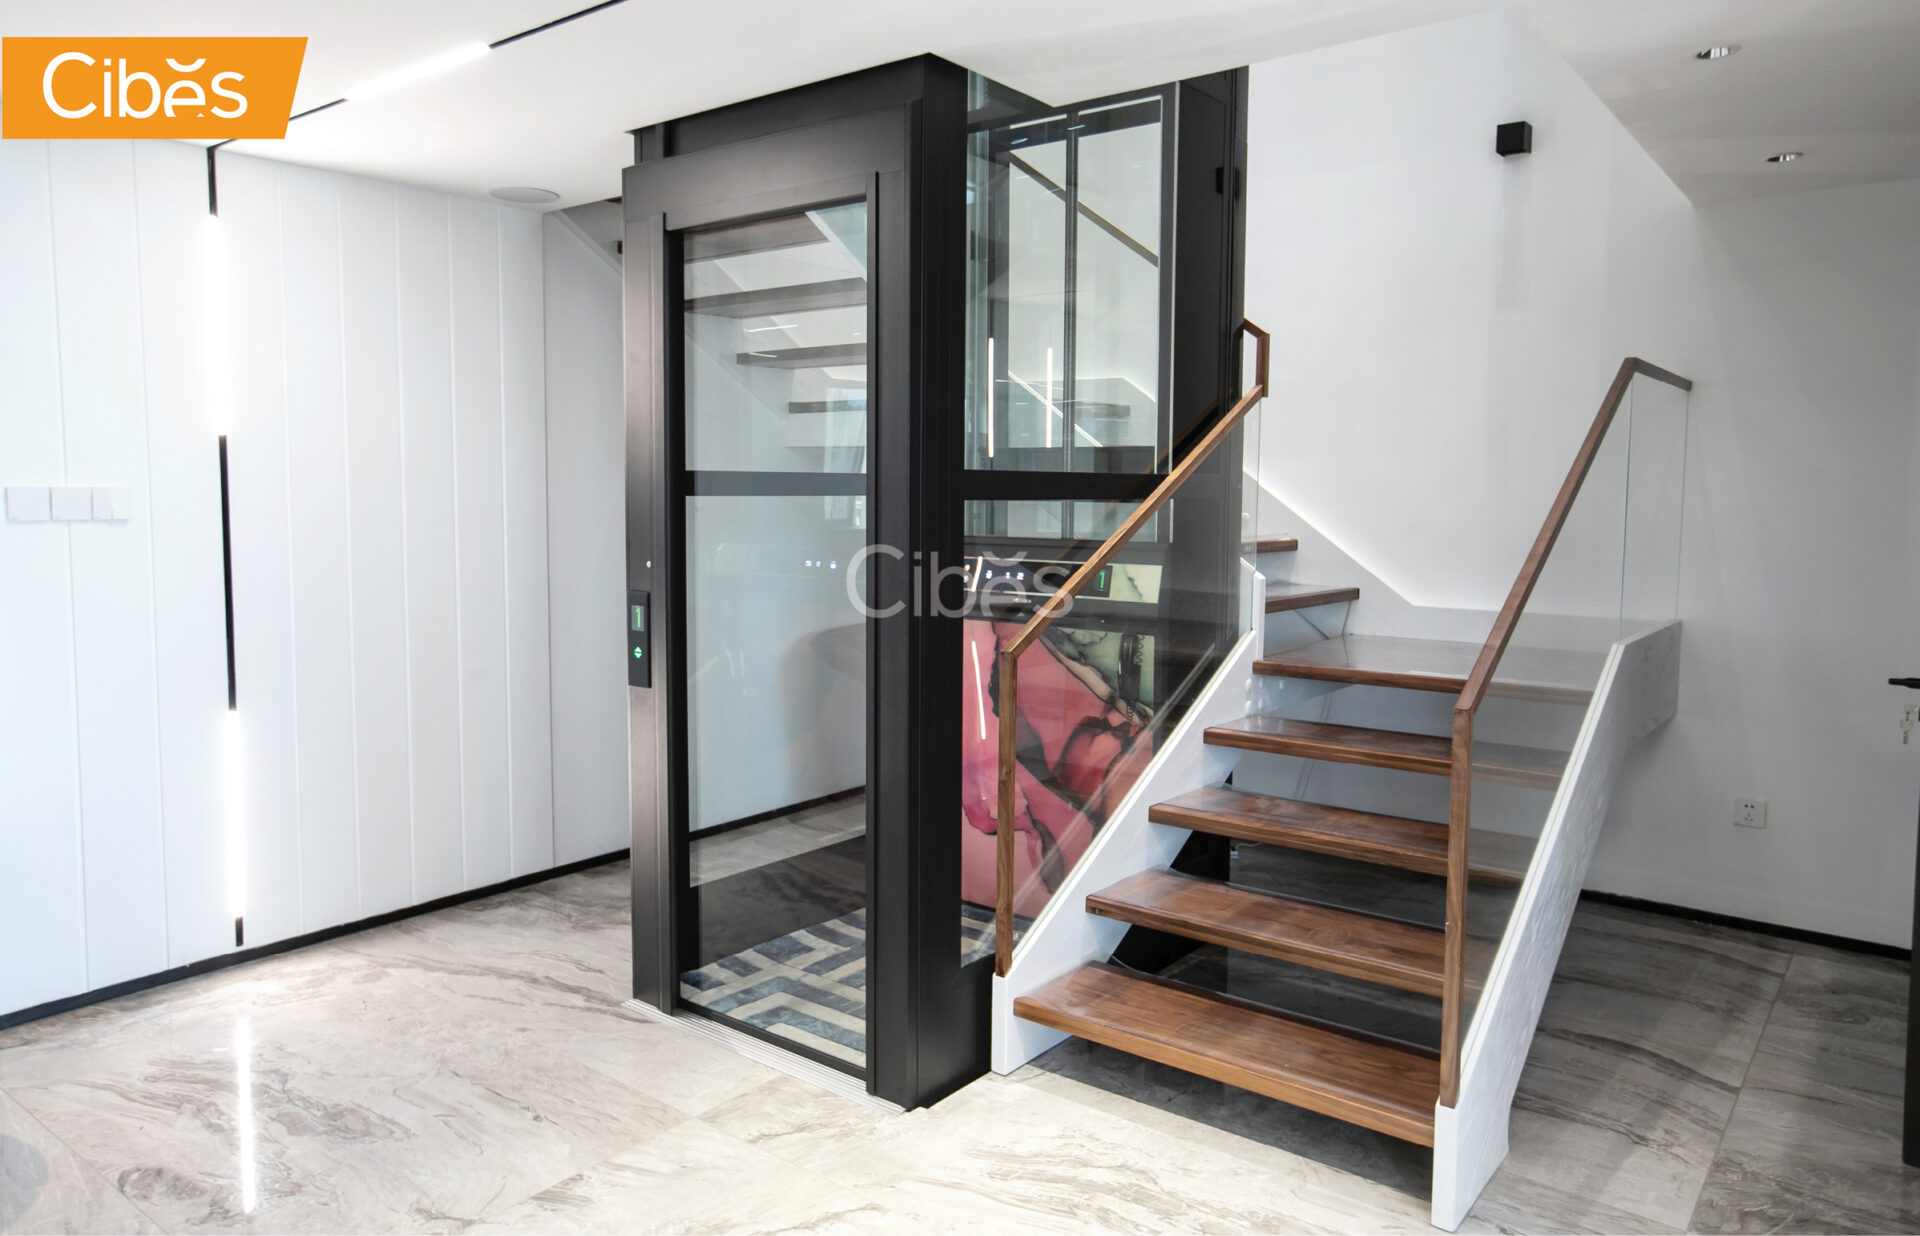 HOME LIFTS – Middle of stairs au31